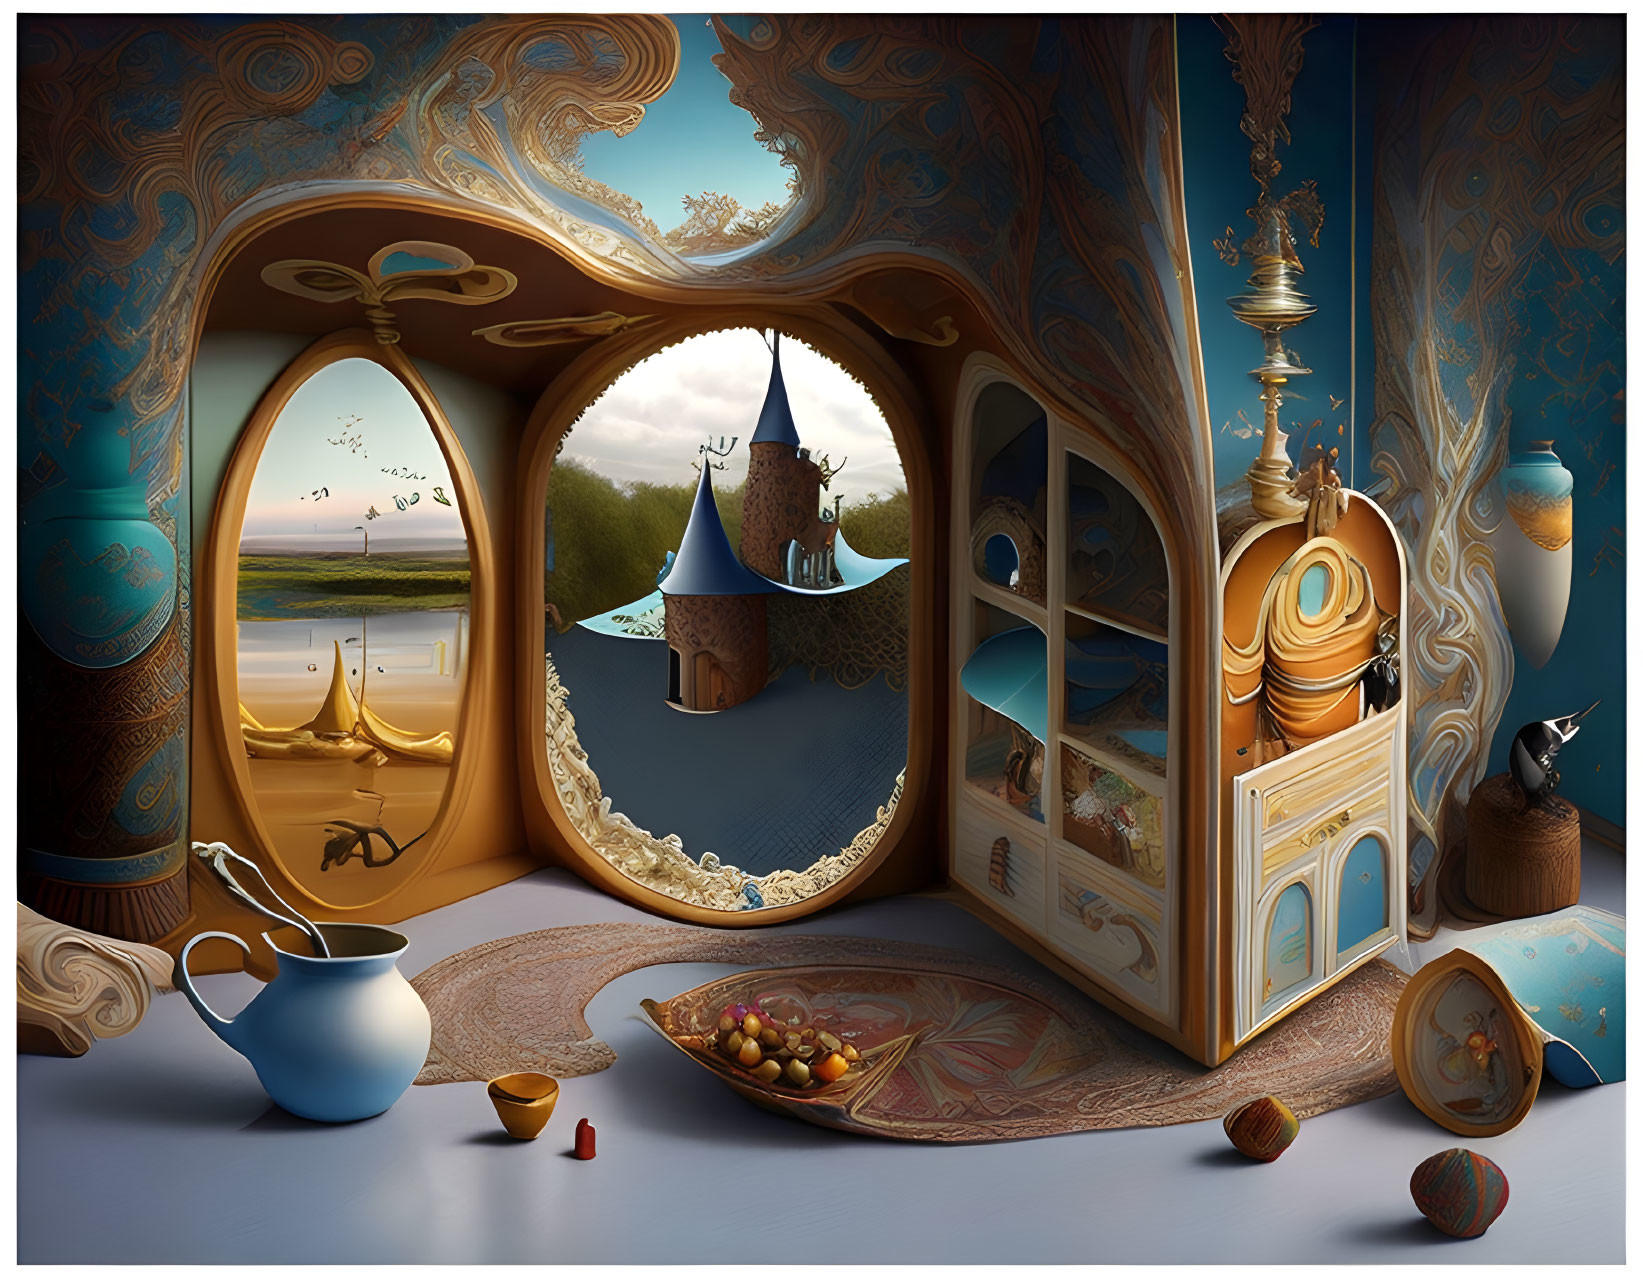 Whimsical room with ornate walls and surreal floating castle view